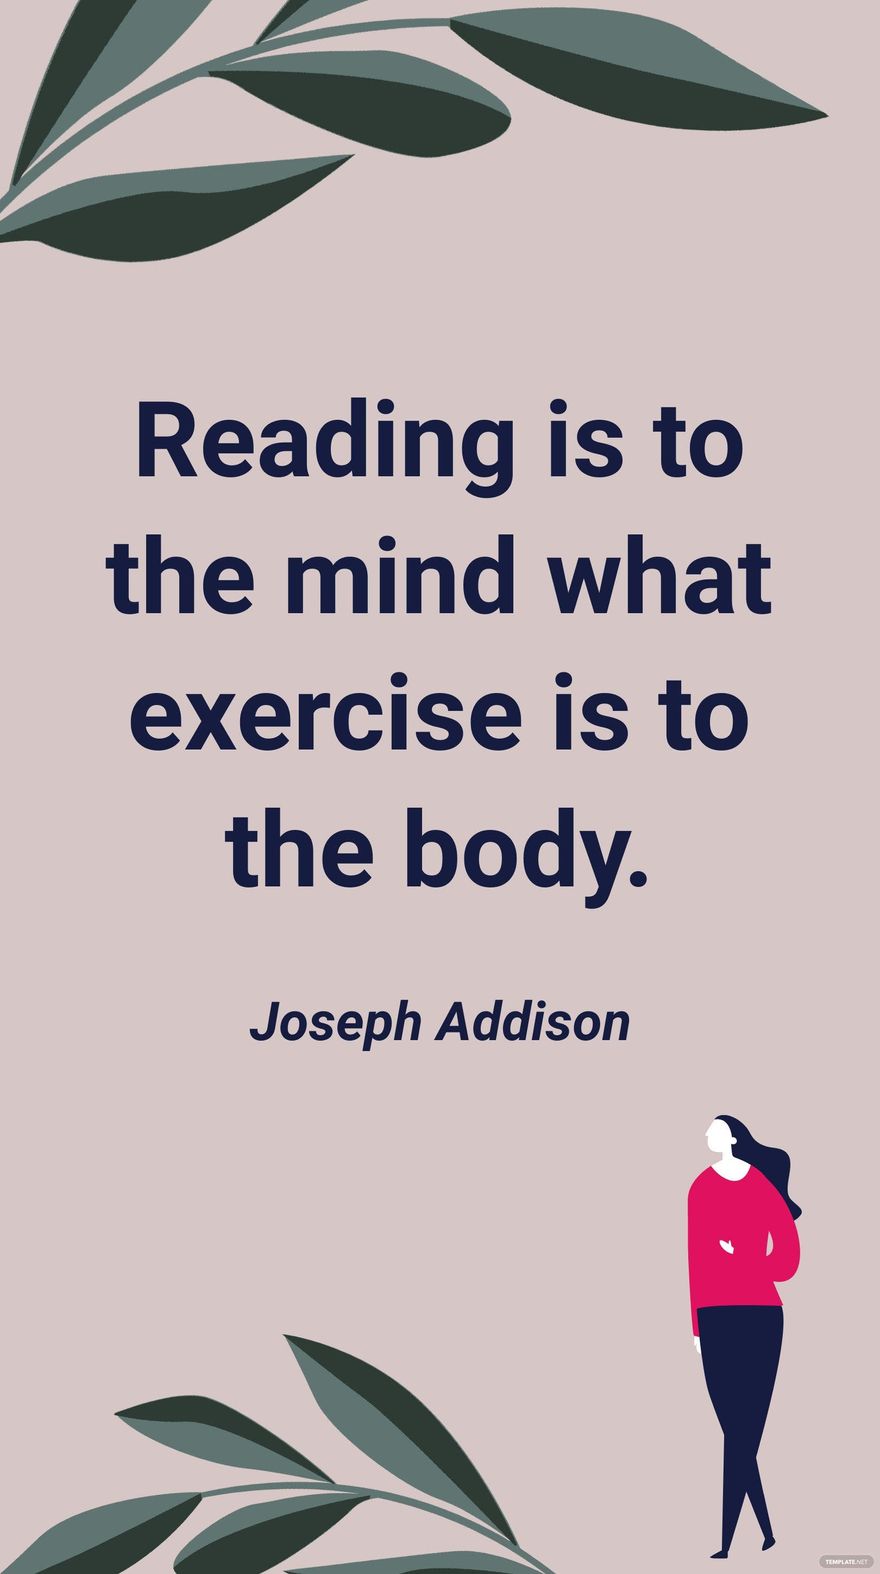 Free Joseph Addison - Reading is to the mind what exercise is to the body. in JPG